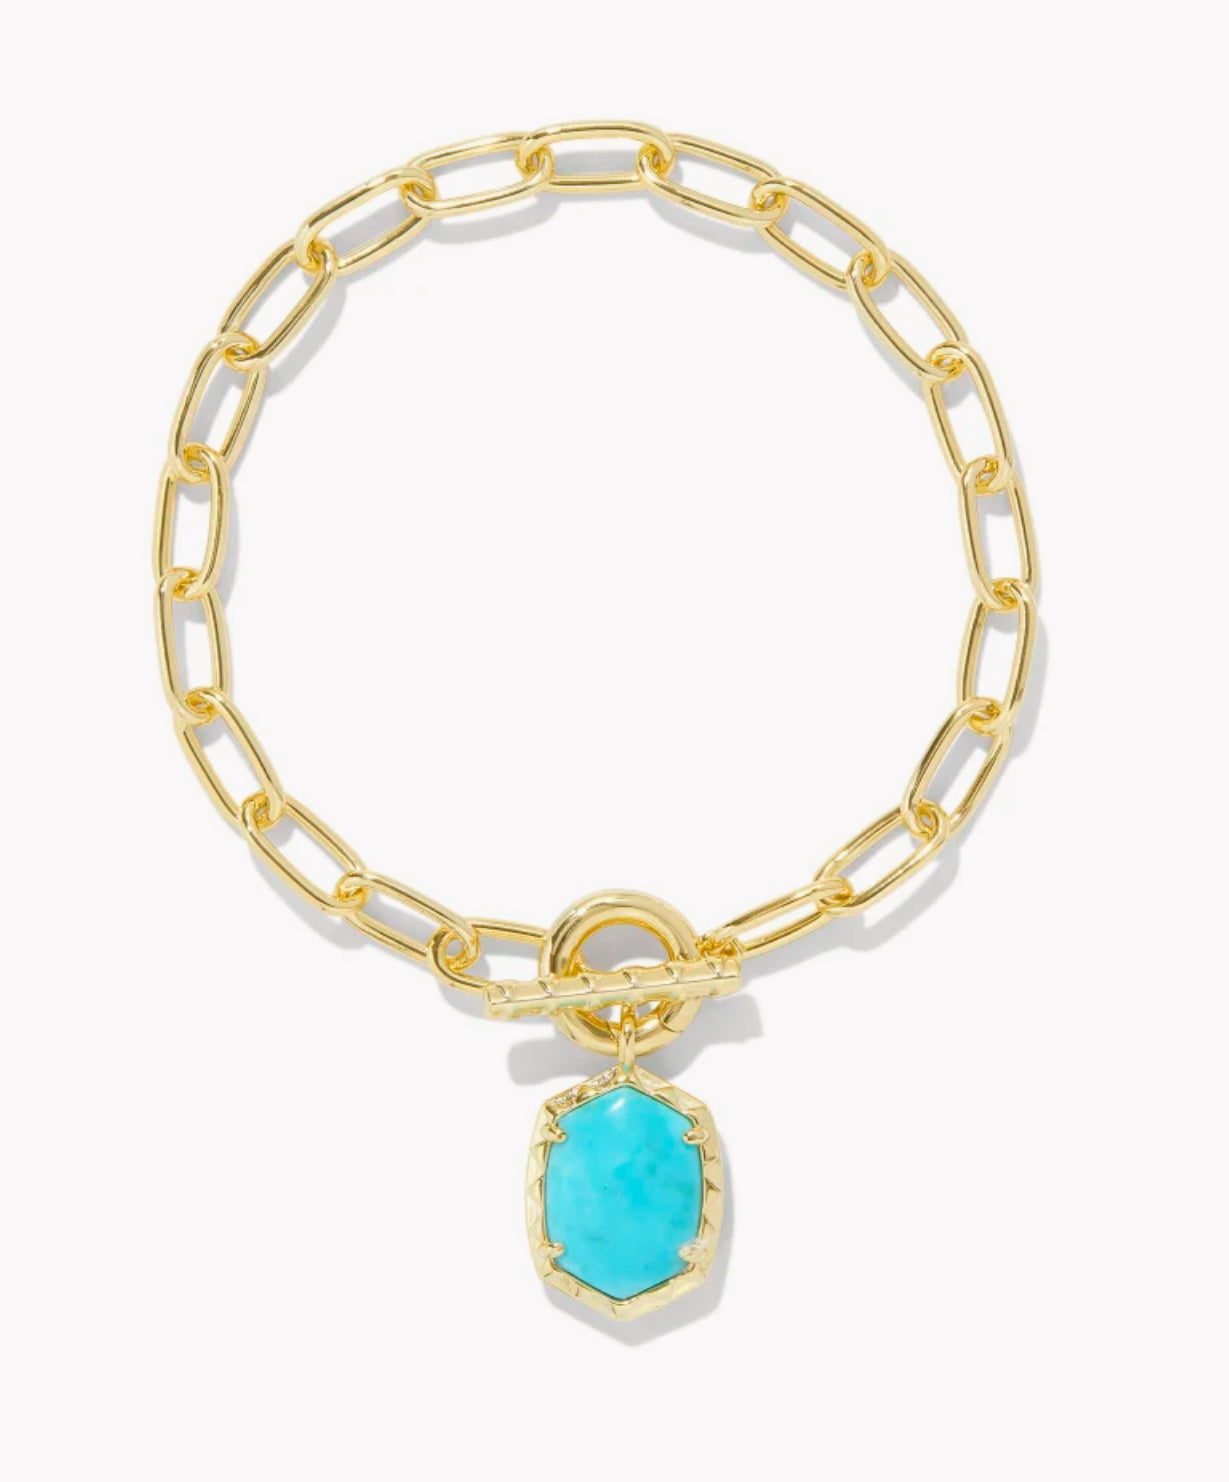 Daphne Gold Link and Chain Bracelet in Variegated Turquoise